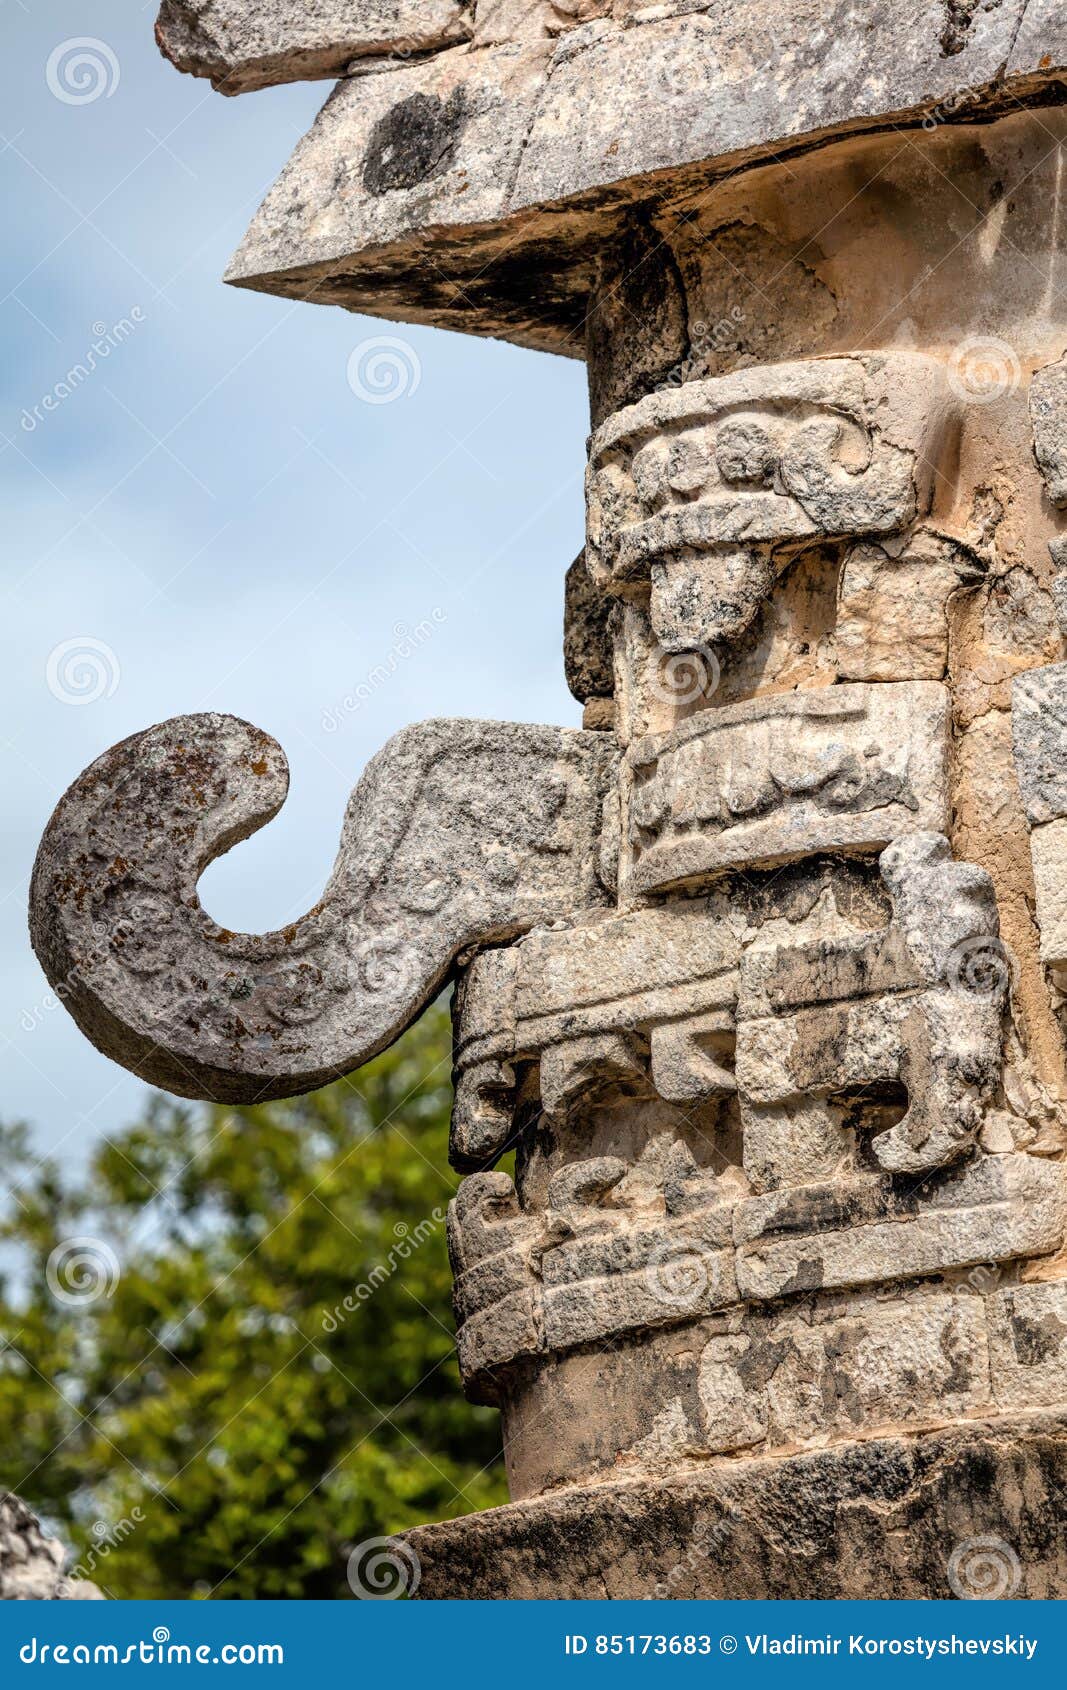 mask of chac, the ancient mayan god of rain and lightning